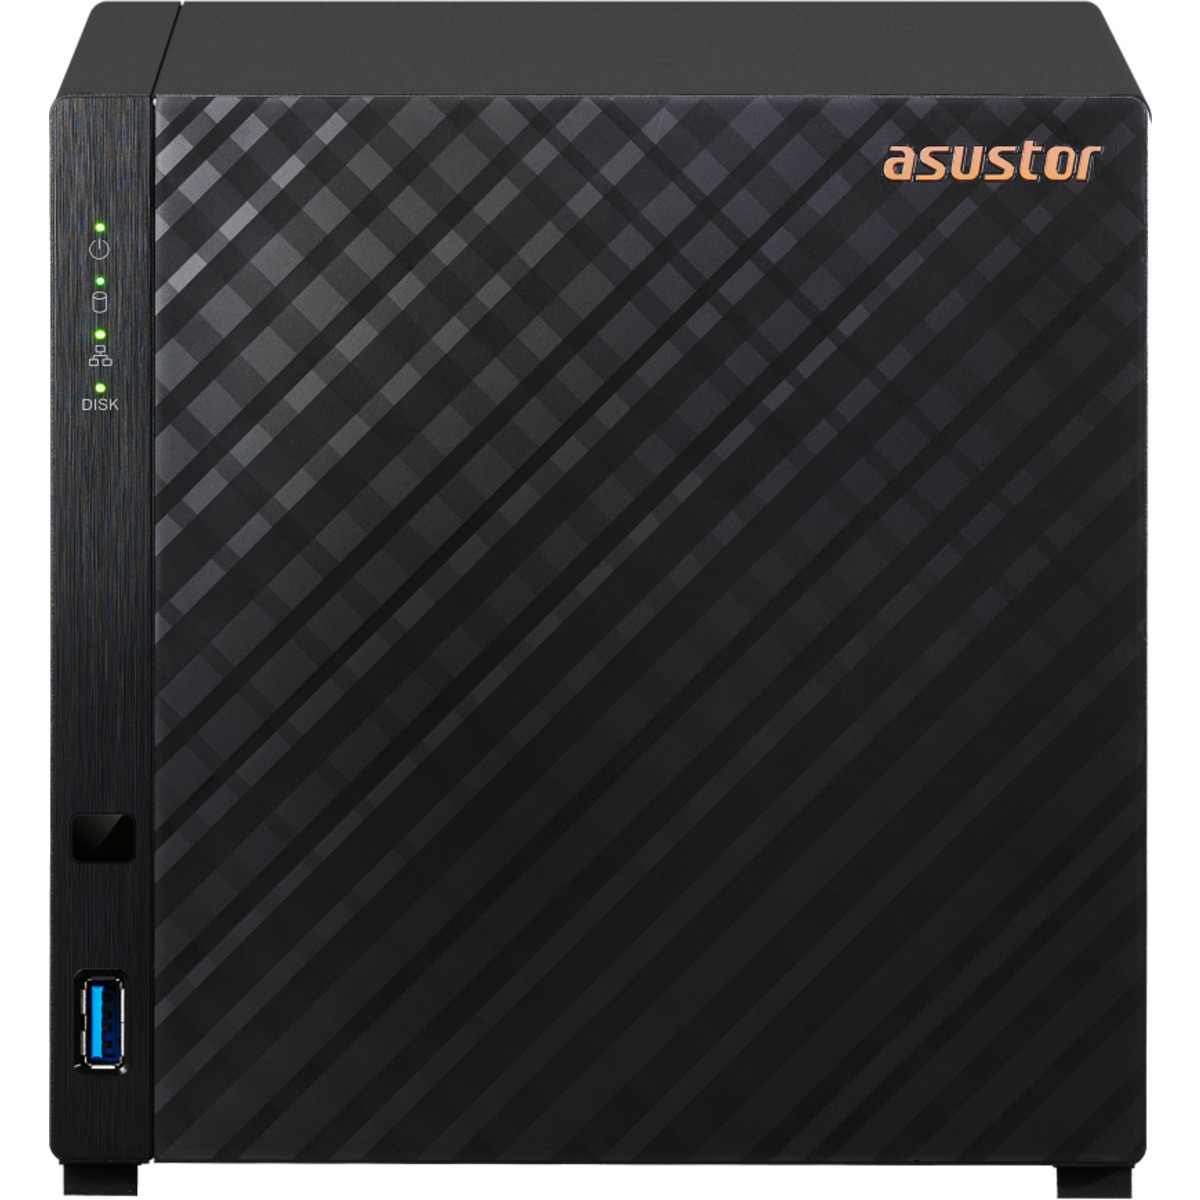 buy ASUSTOR DRIVESTOR 4 AS1104T Desktop NAS - Network Attached Storage Device Burn-In Tested Configurations - nas headquarters buy network attached storage server device das new raid-5 free shipping usa DRIVESTOR 4 AS1104T